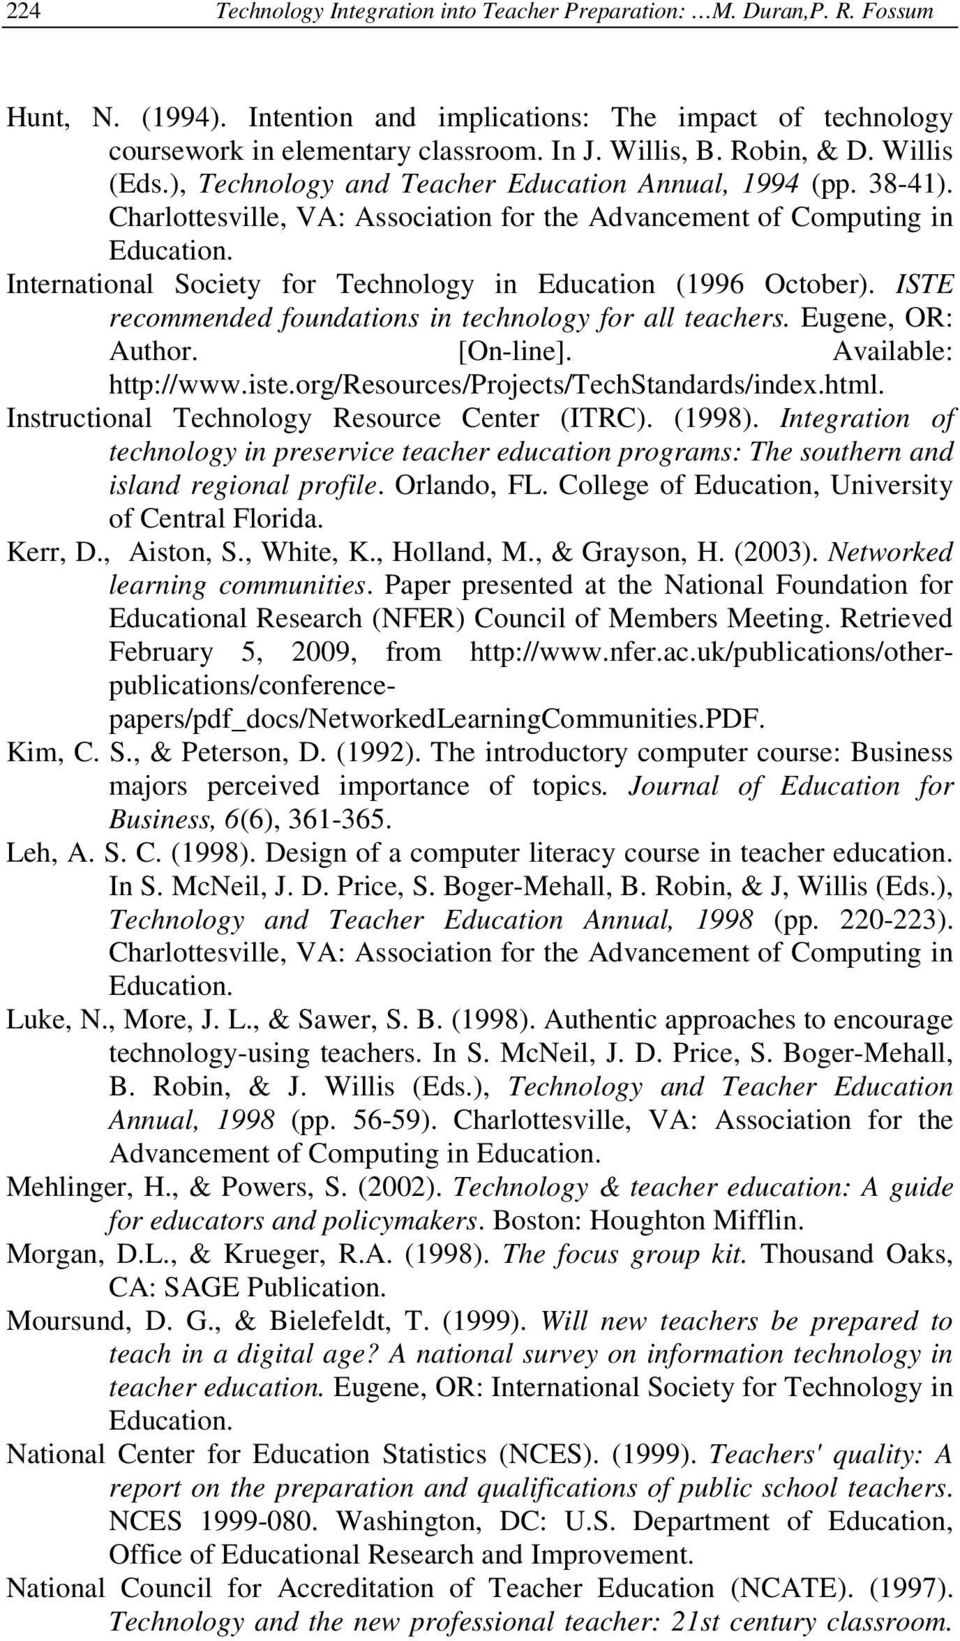 International Society for Technology in Education (1996 October). ISTE recommended foundations in technology for all teachers. Eugene, OR: Author. [On-line]. Available: http://www.iste.